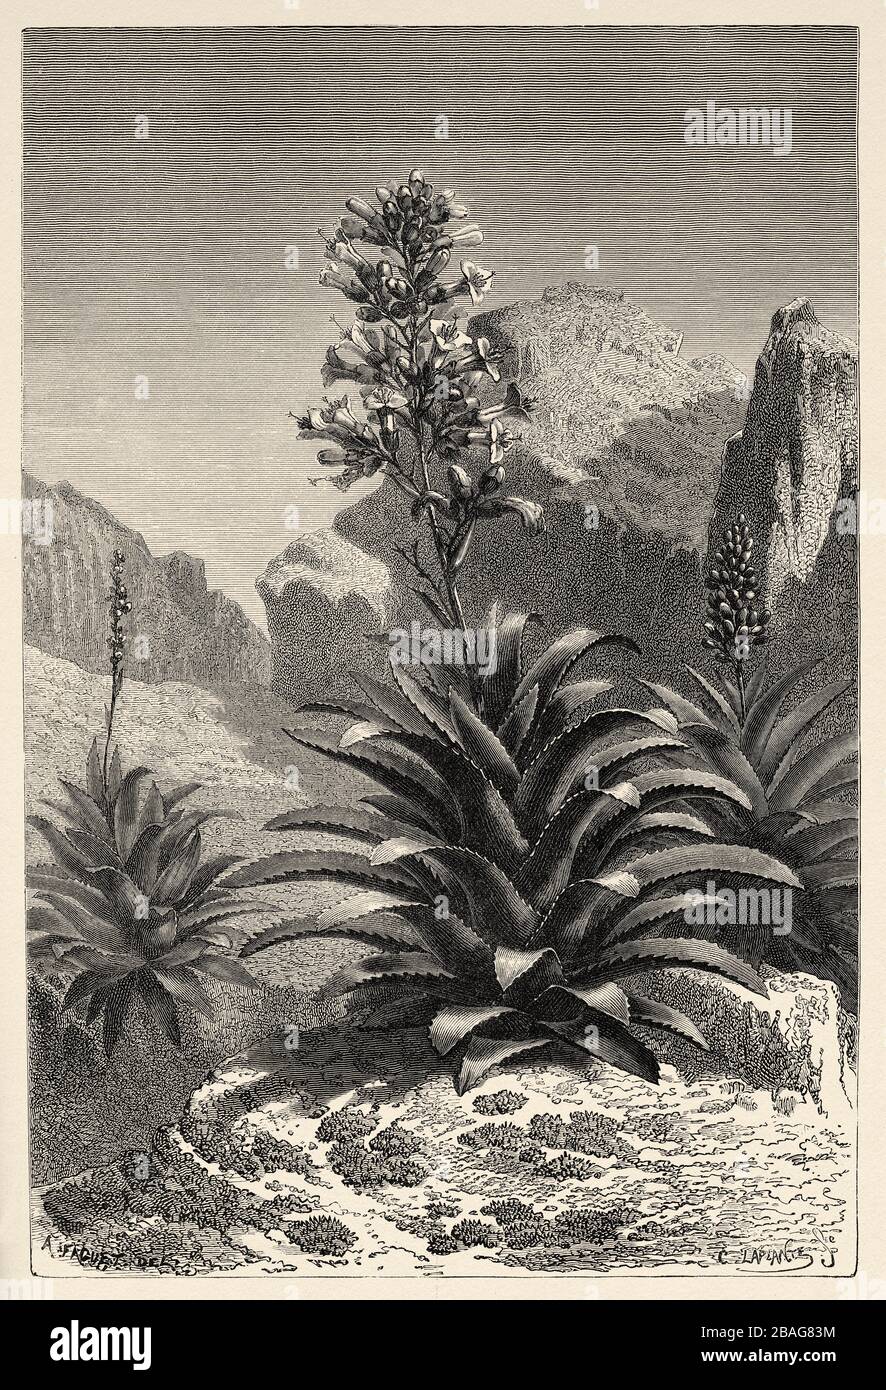 Aechmea Paniculata in Bloom, Peru. South America. Trip to the Valley of the Quinas by Paul Marcoy. Old engraving El Mundo en la Mano 1878 Stock Photo